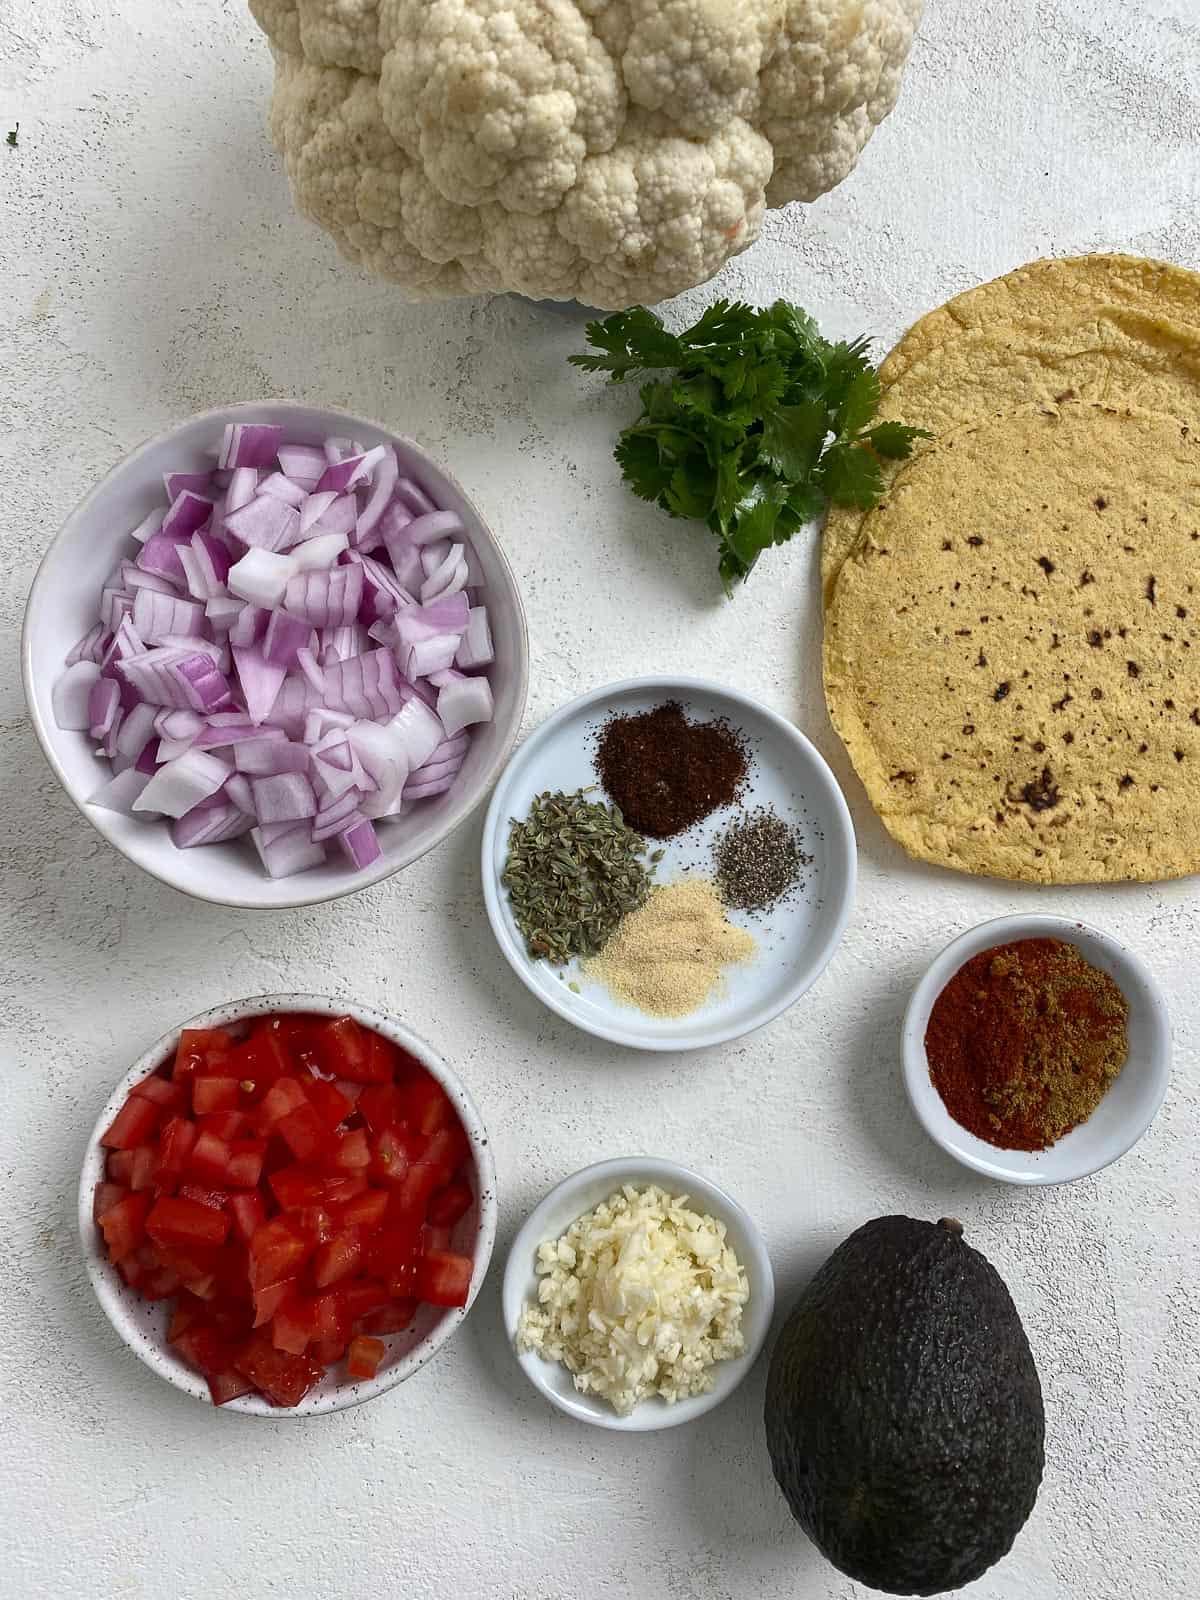 ingredients for Cauliflower and Lentil Tacos measured out against a light surface